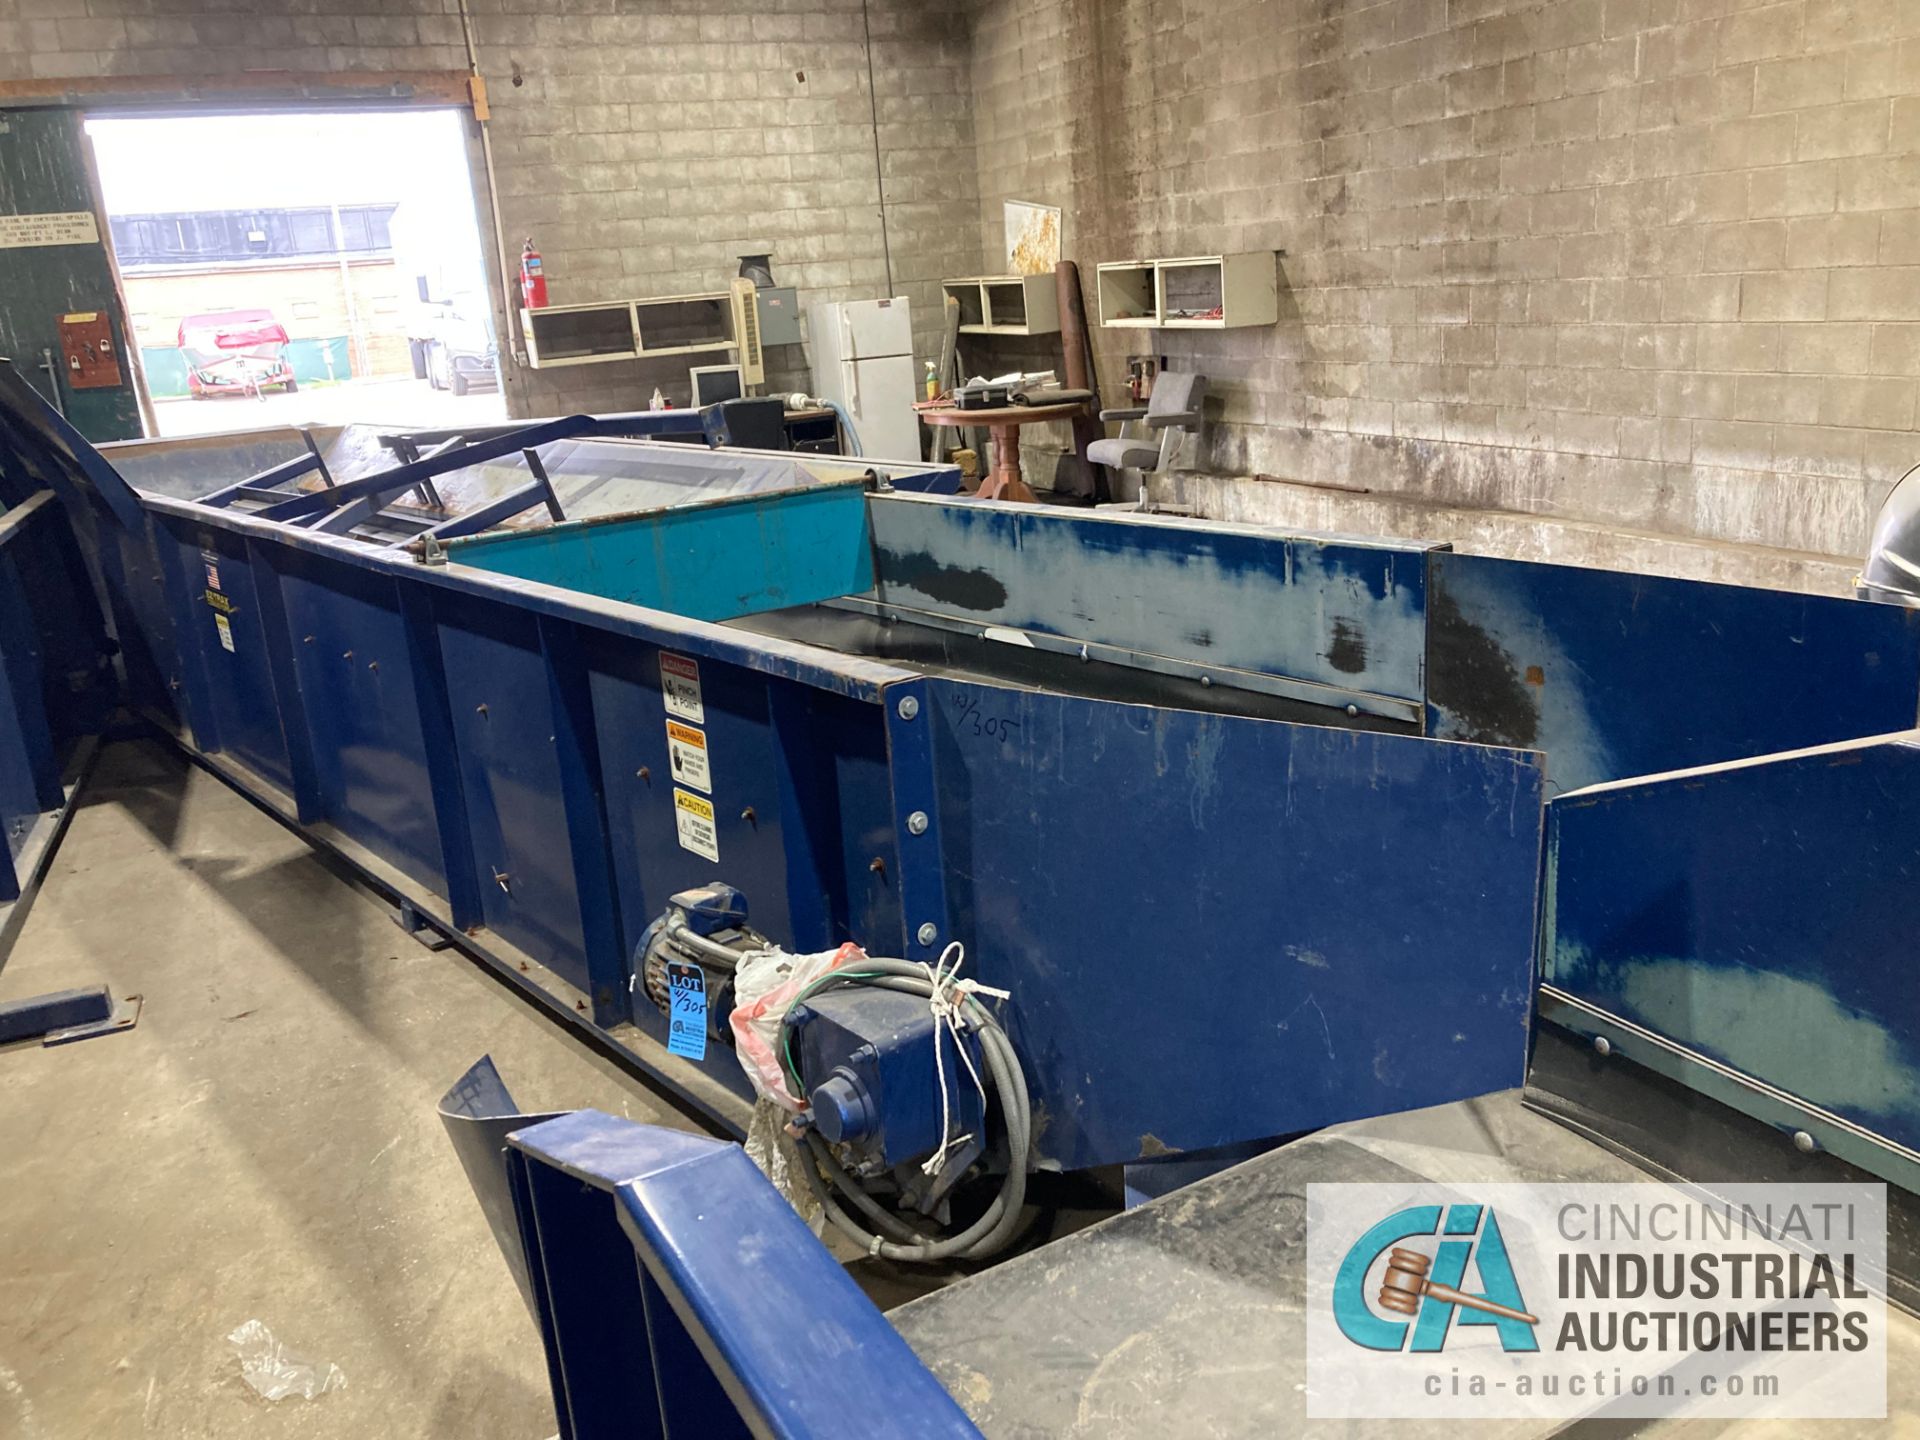 (LOT) 48" WIDE EZ-TRAX CONVEYOR, (3) SECTIONS WITH OVERALL LENGTH OF 80' - Image 4 of 8